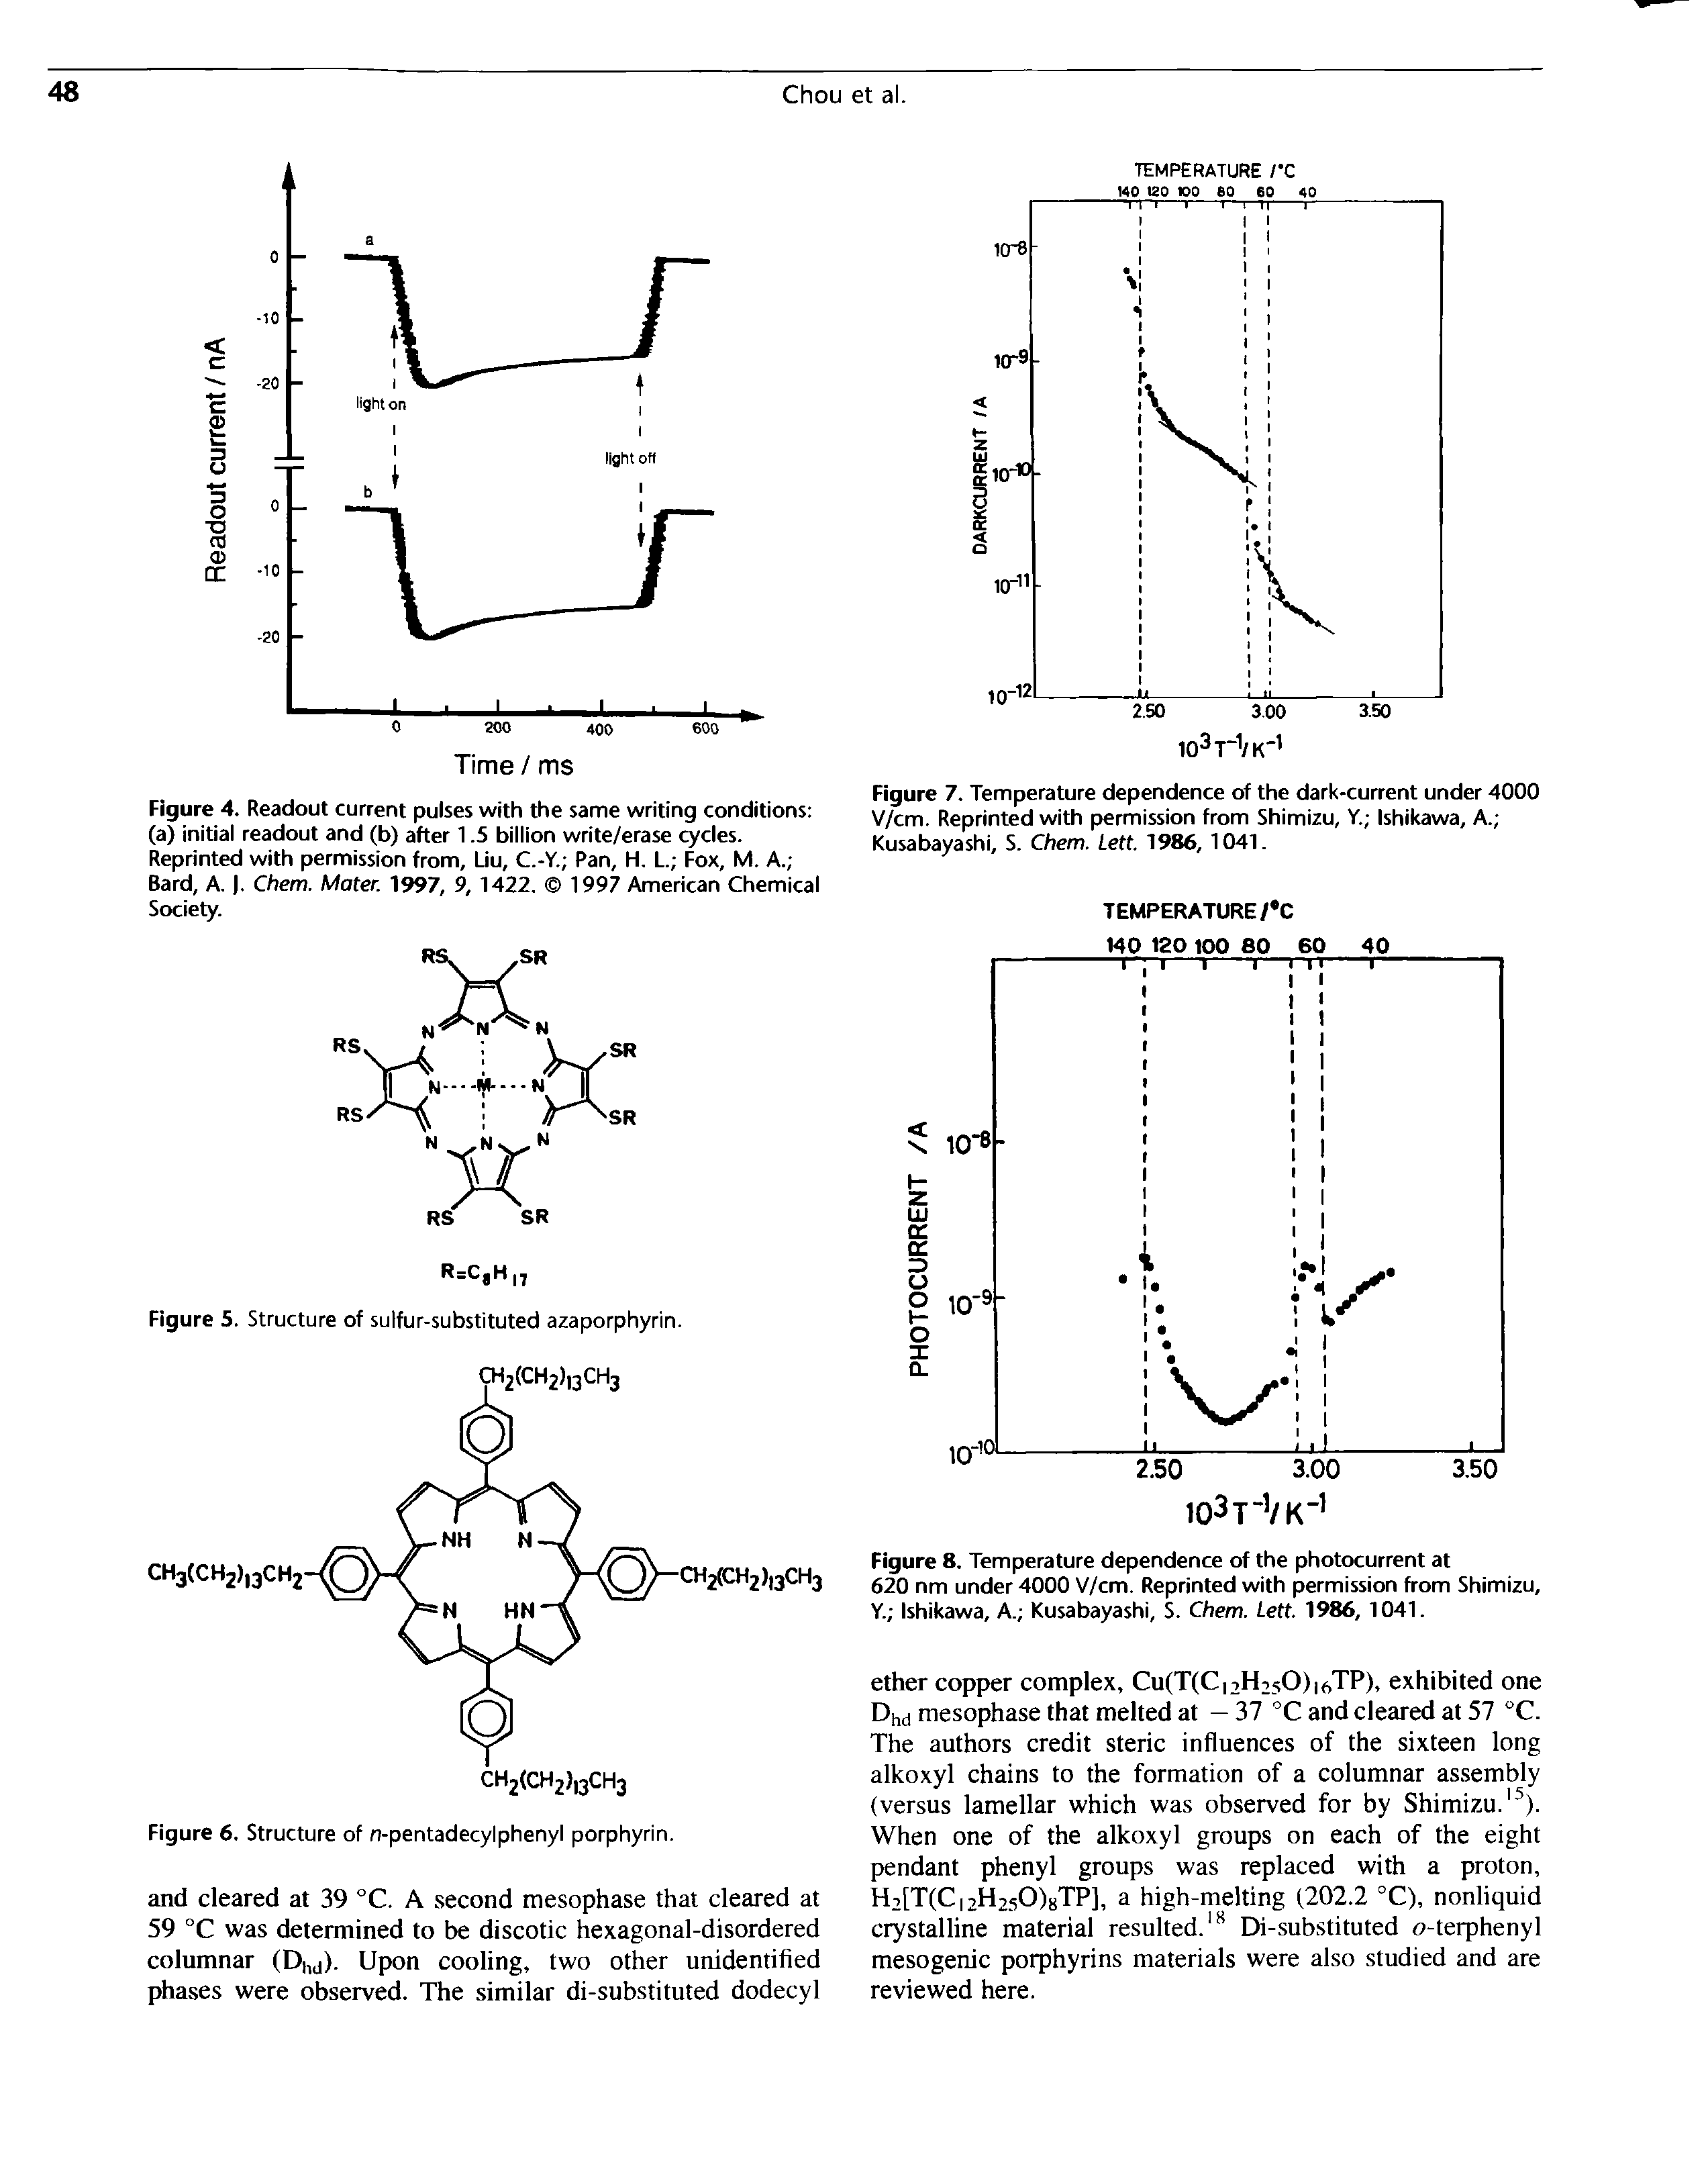 Figure 4. Readout current pulses with the same writing conditions (a) initial readout and (b) after 1.5 billion write/erase cycles. Reprinted with permission from, Liu, C.-Y. Pan, H. L. Fox, M. A. Bard, A.. Chem. Mater. 1997, 9, 1422. 1997 American Chemical Society.